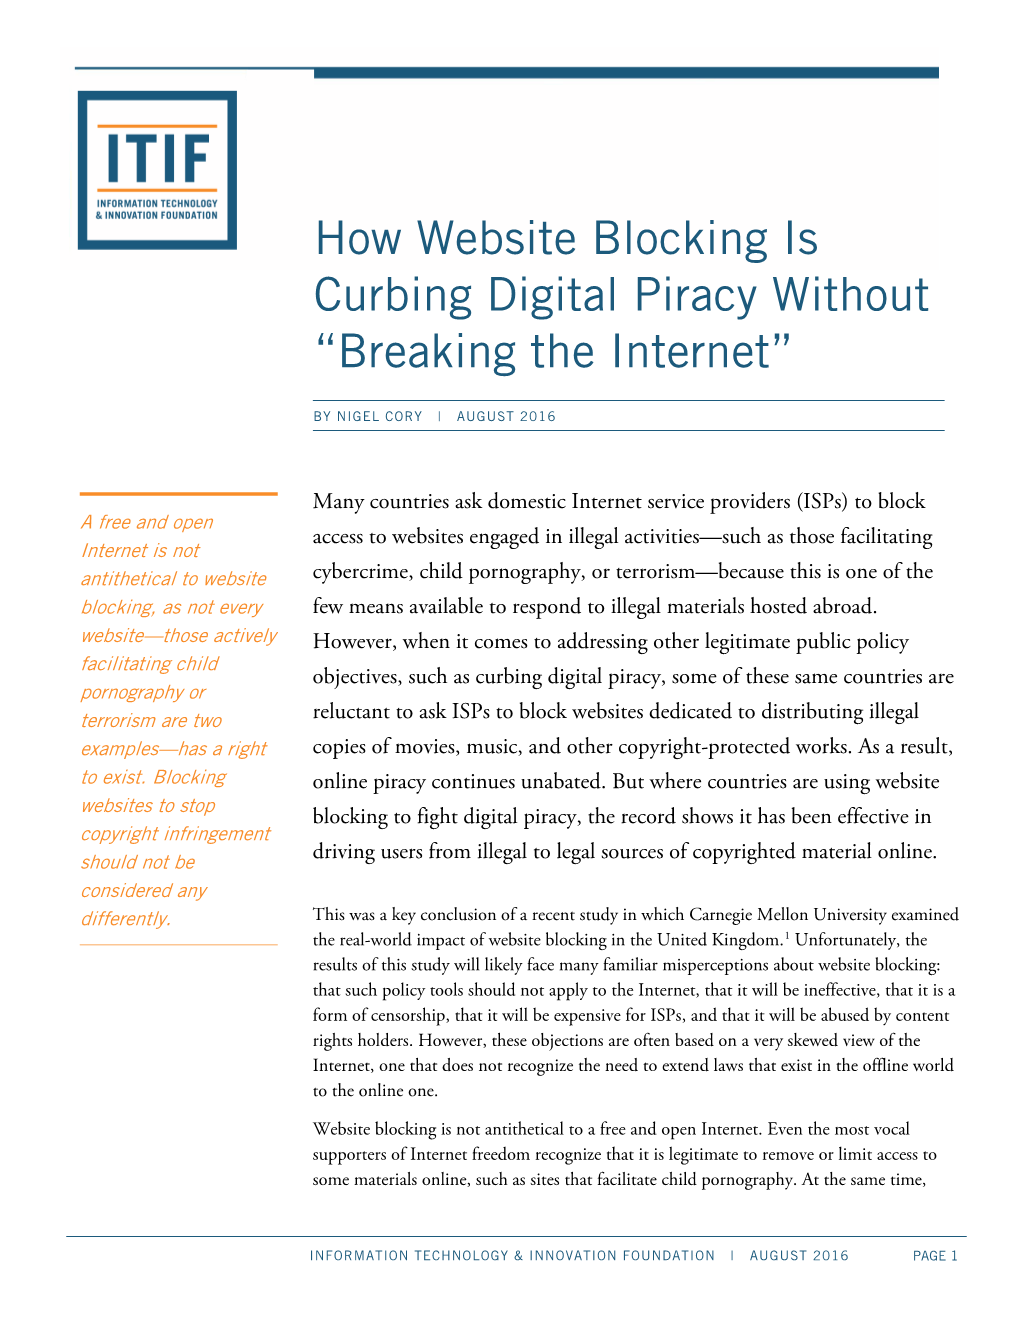 How Website Blocking Is Curbing Digital Piracy Without “Breaking the Internet”